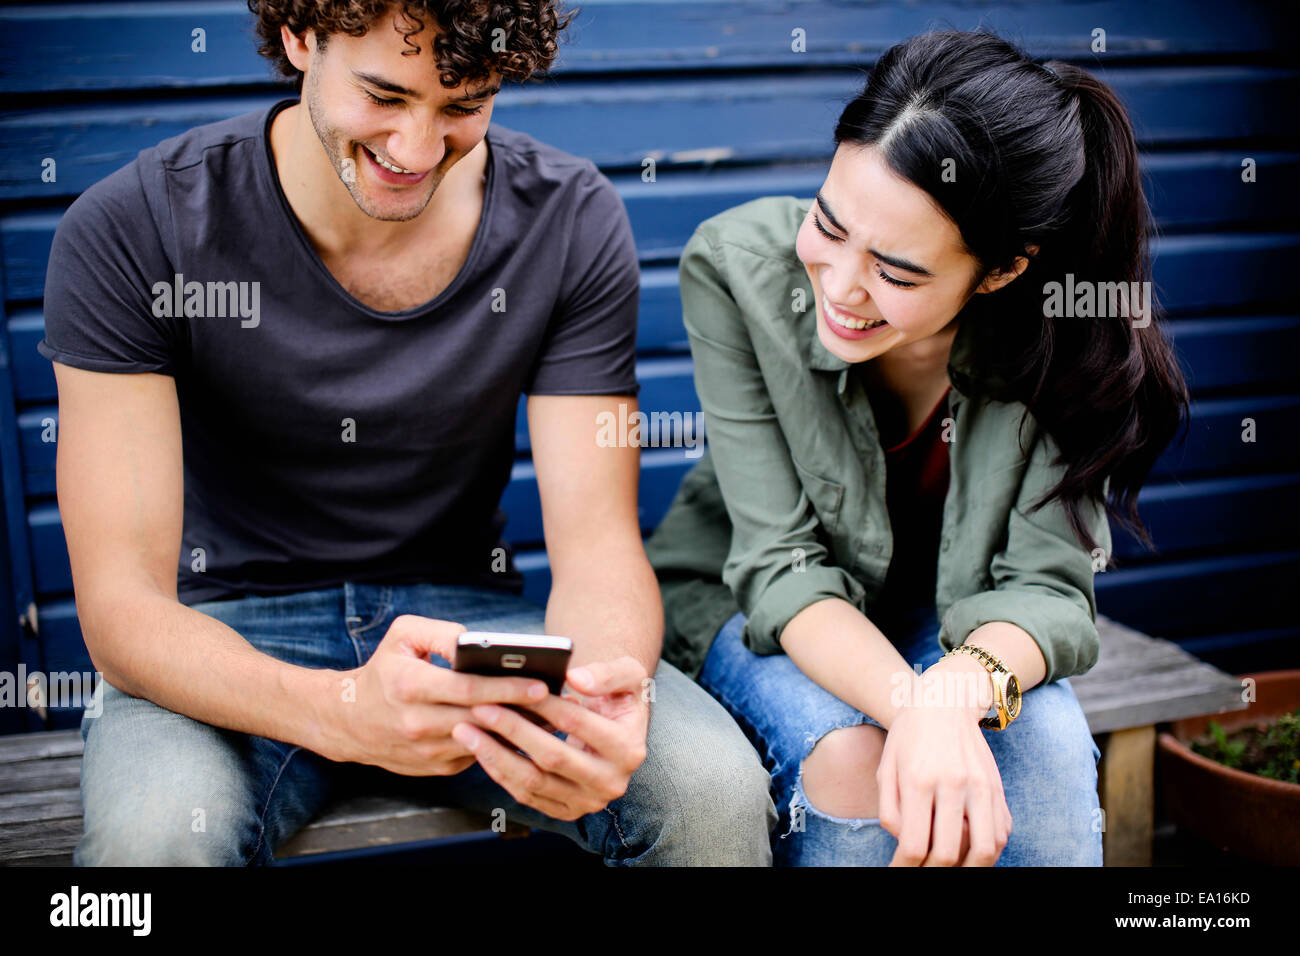 Couple laughing at phone message Stock Photo